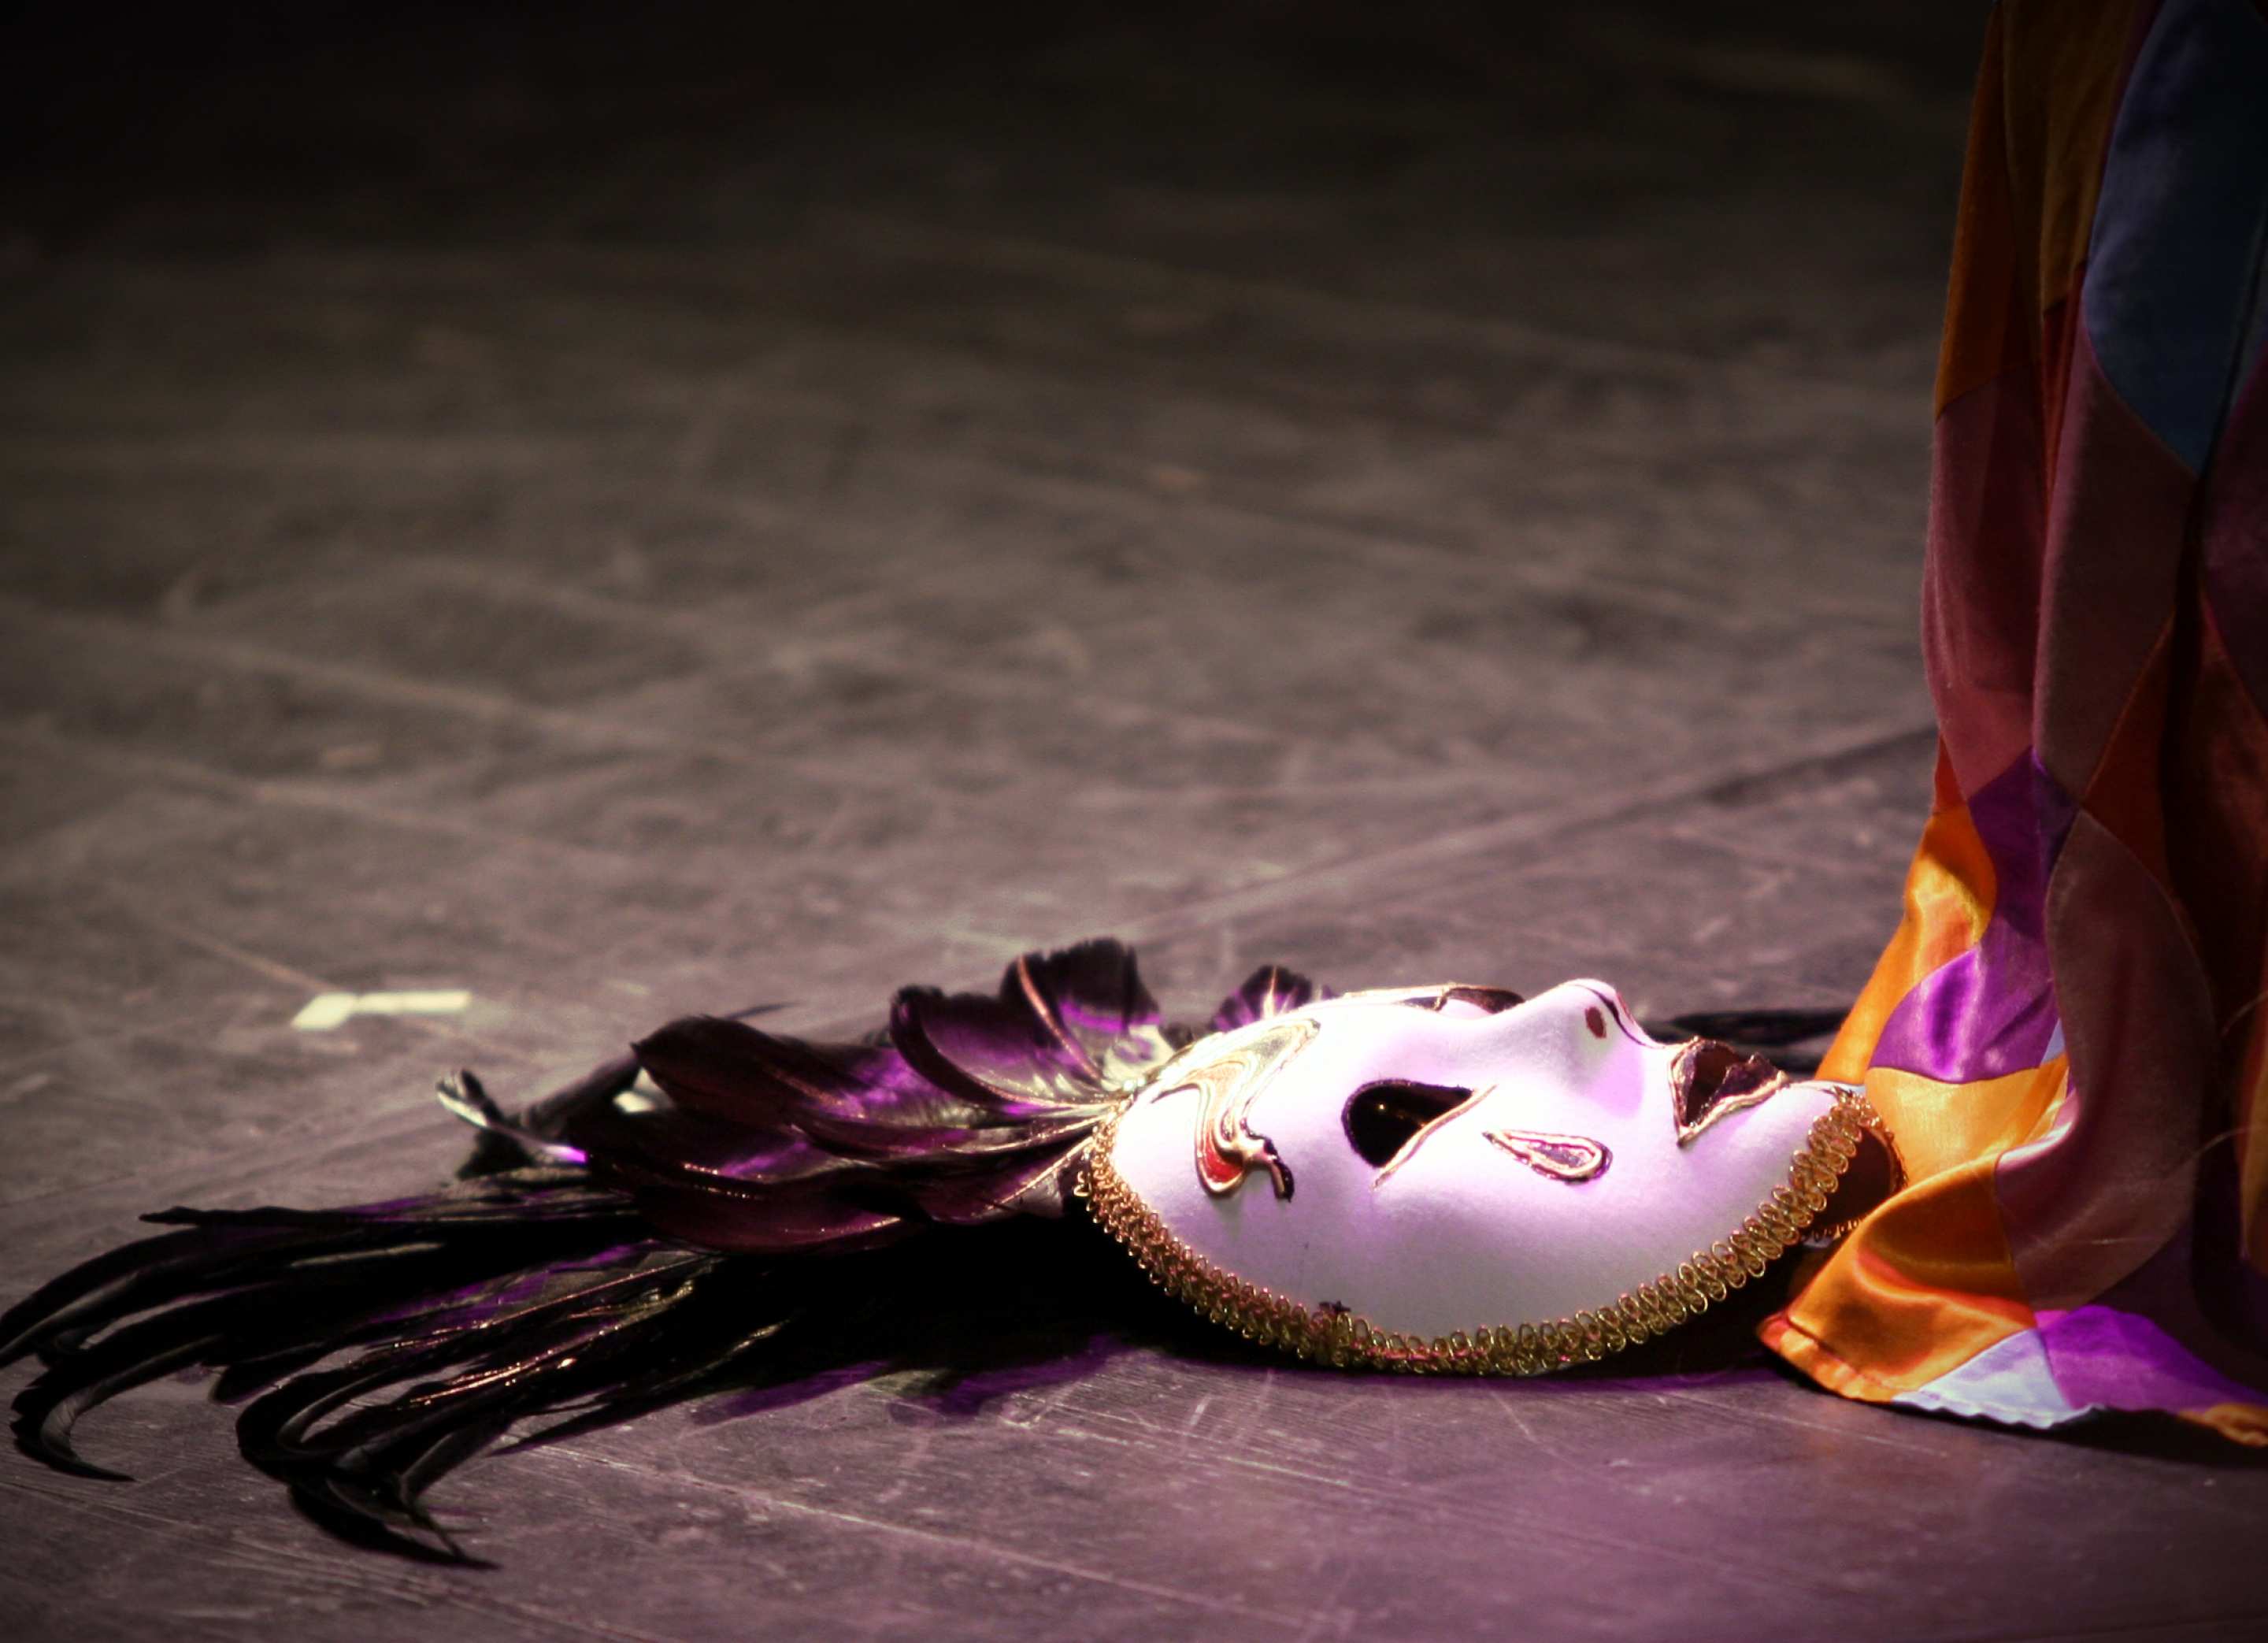 A stage performer's mask lies beside a stage curtain. Image: freeimages.com